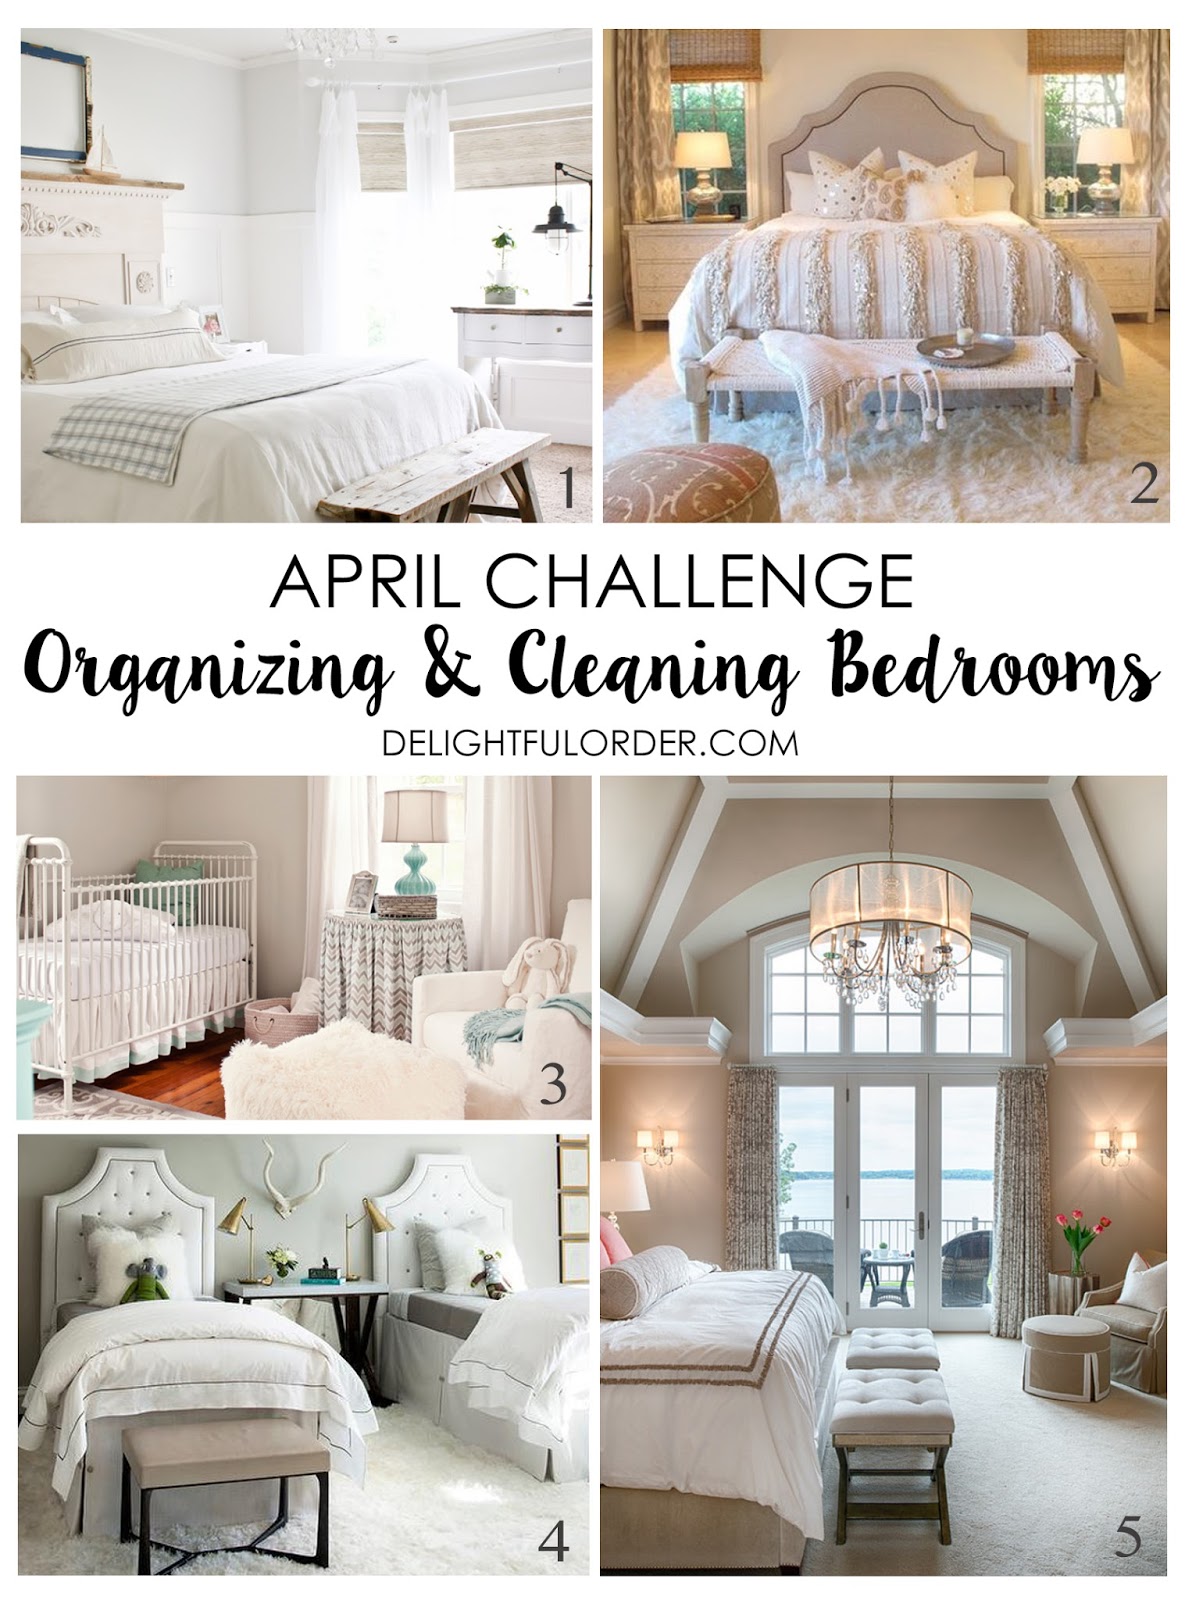 Delightful Order: April Challenge: Organizing & Cleaning Bedrooms